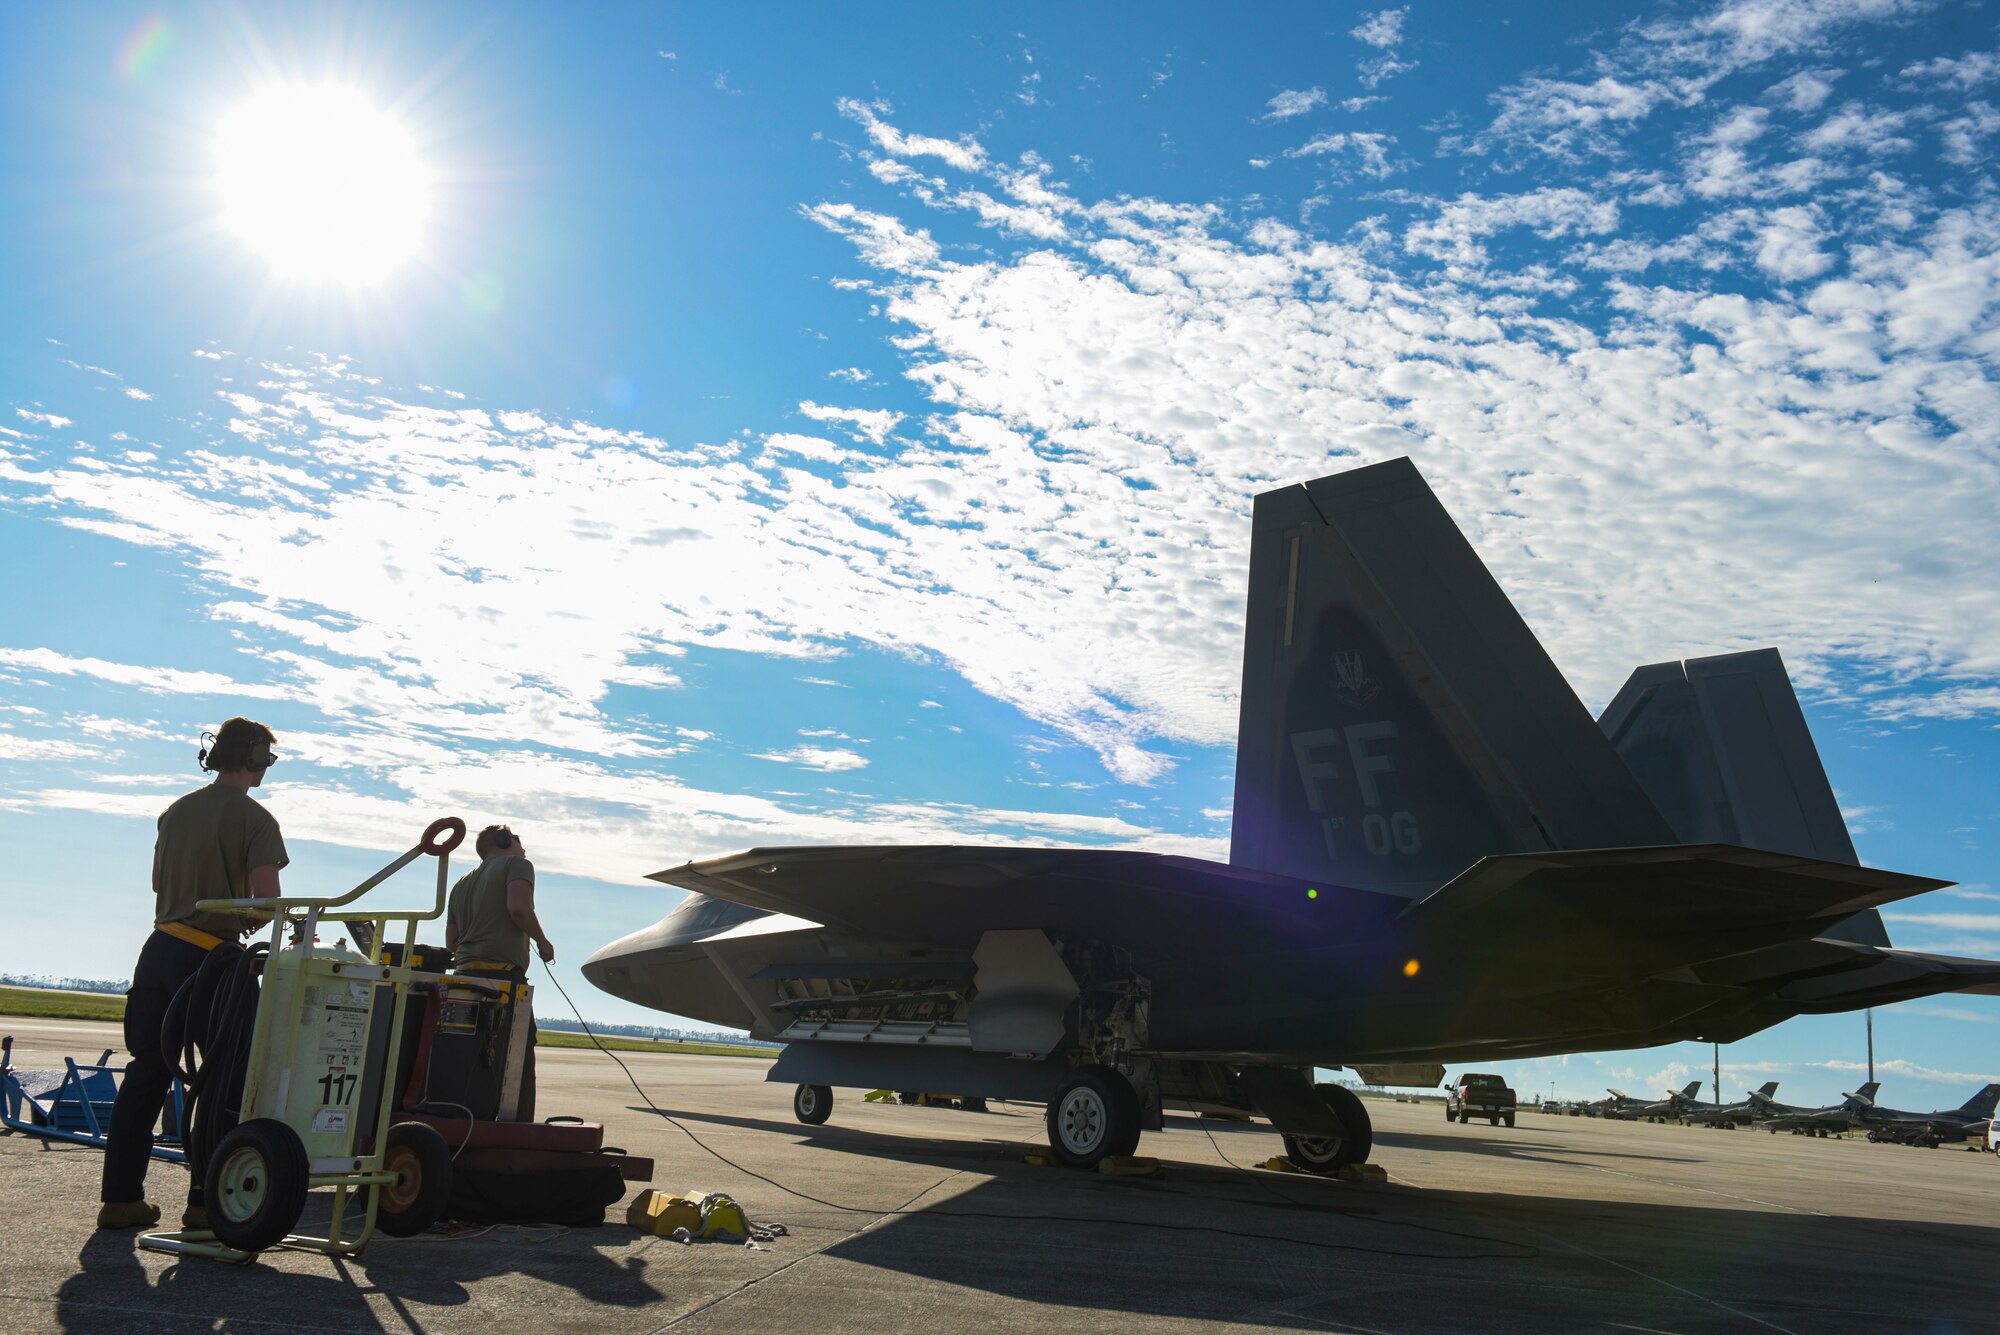 U.S. Air Force maintainers perform pre-flight checks on an aircraft.